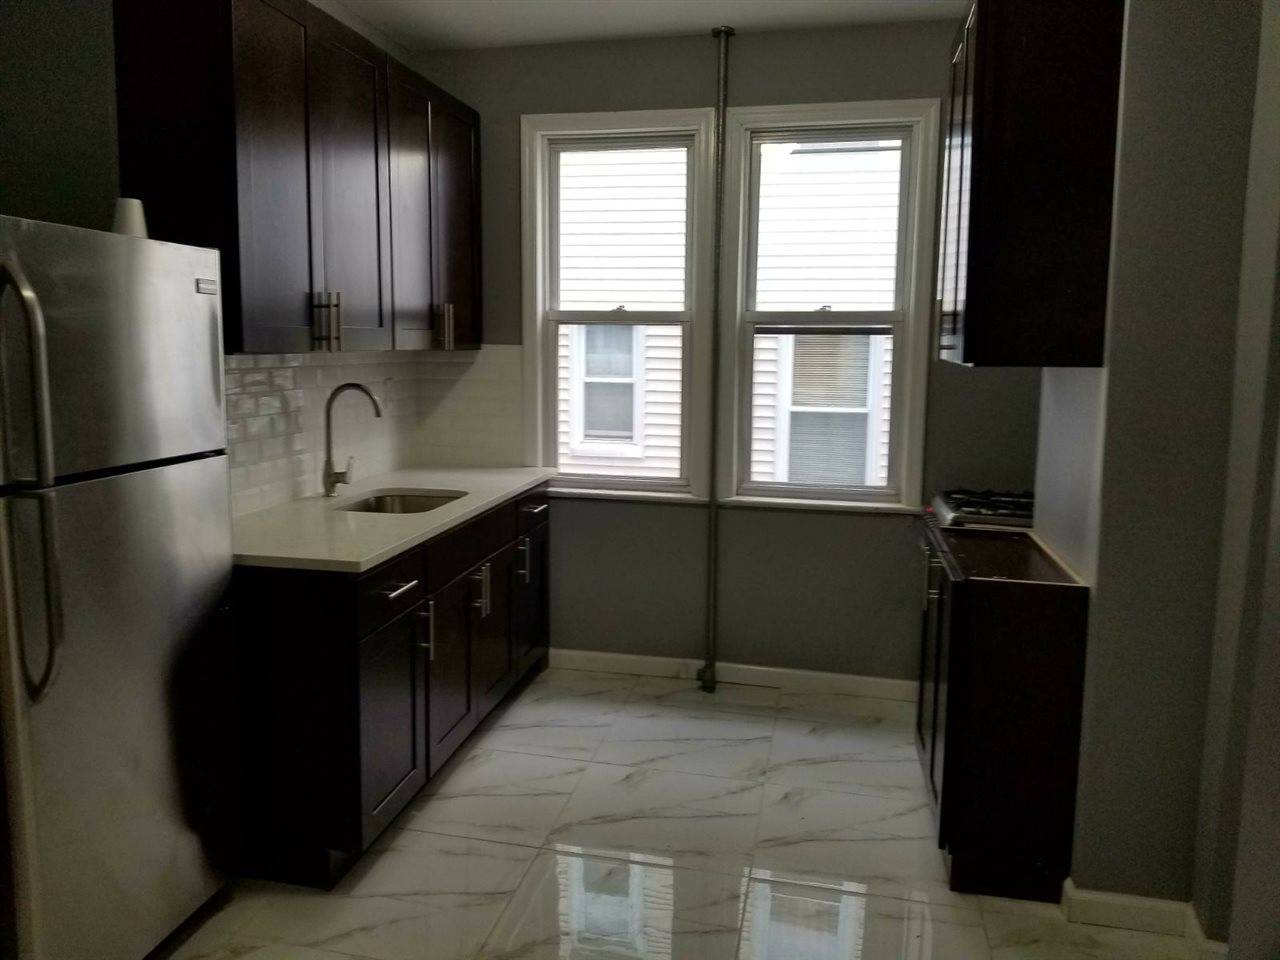 Be the first to move into this newly renovated 2-bedroom unit with lots of closet space